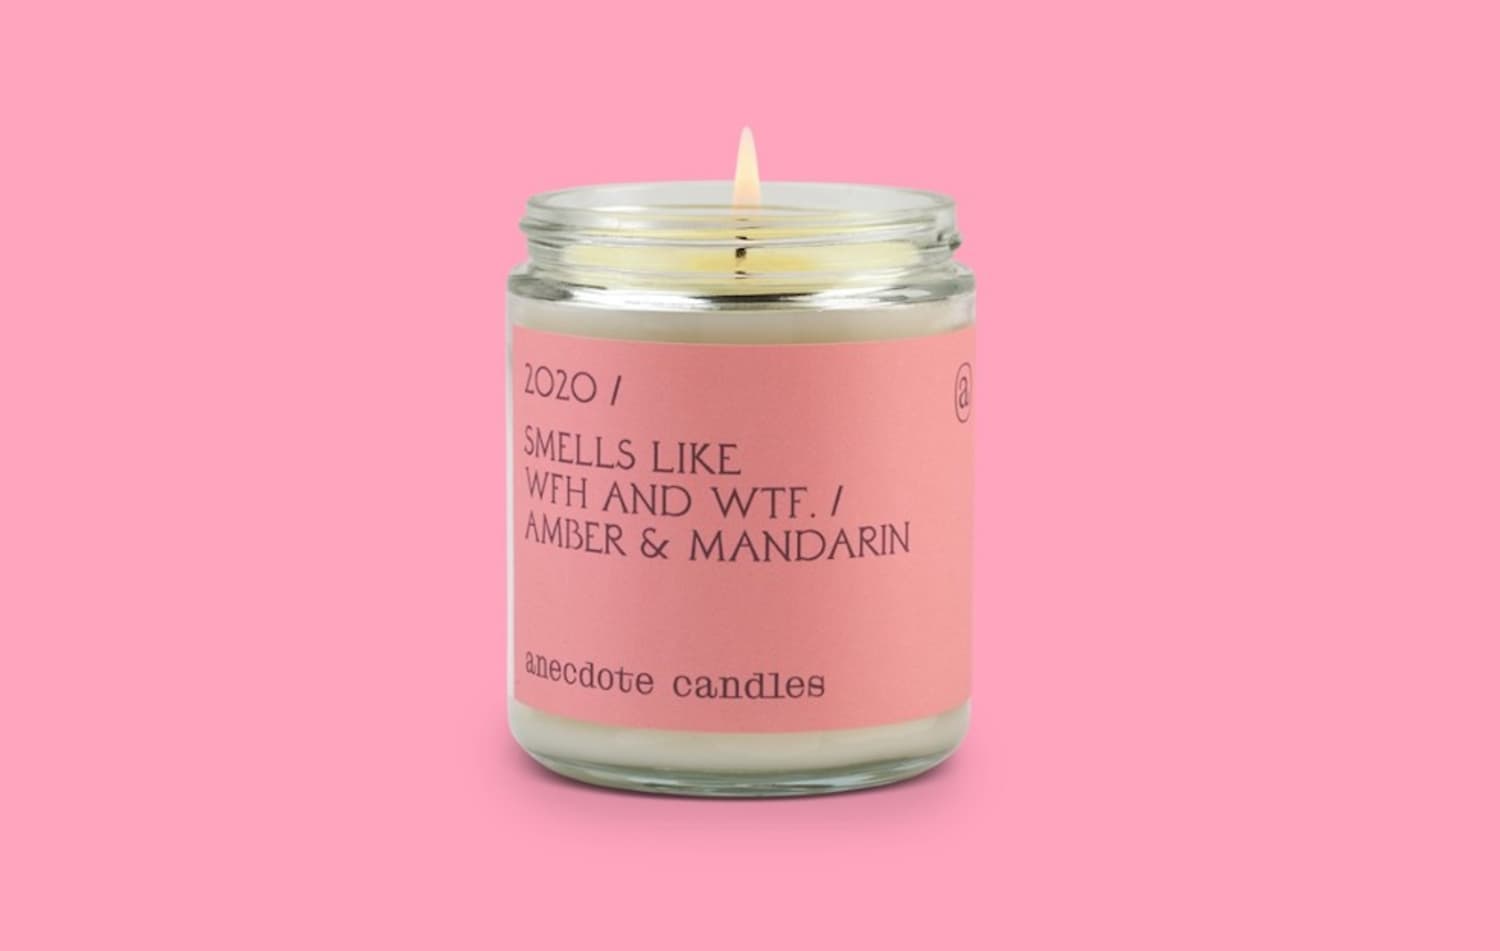 Anecdote’s Candle of the Year is Inspired By the Dumpster Fire of 2020